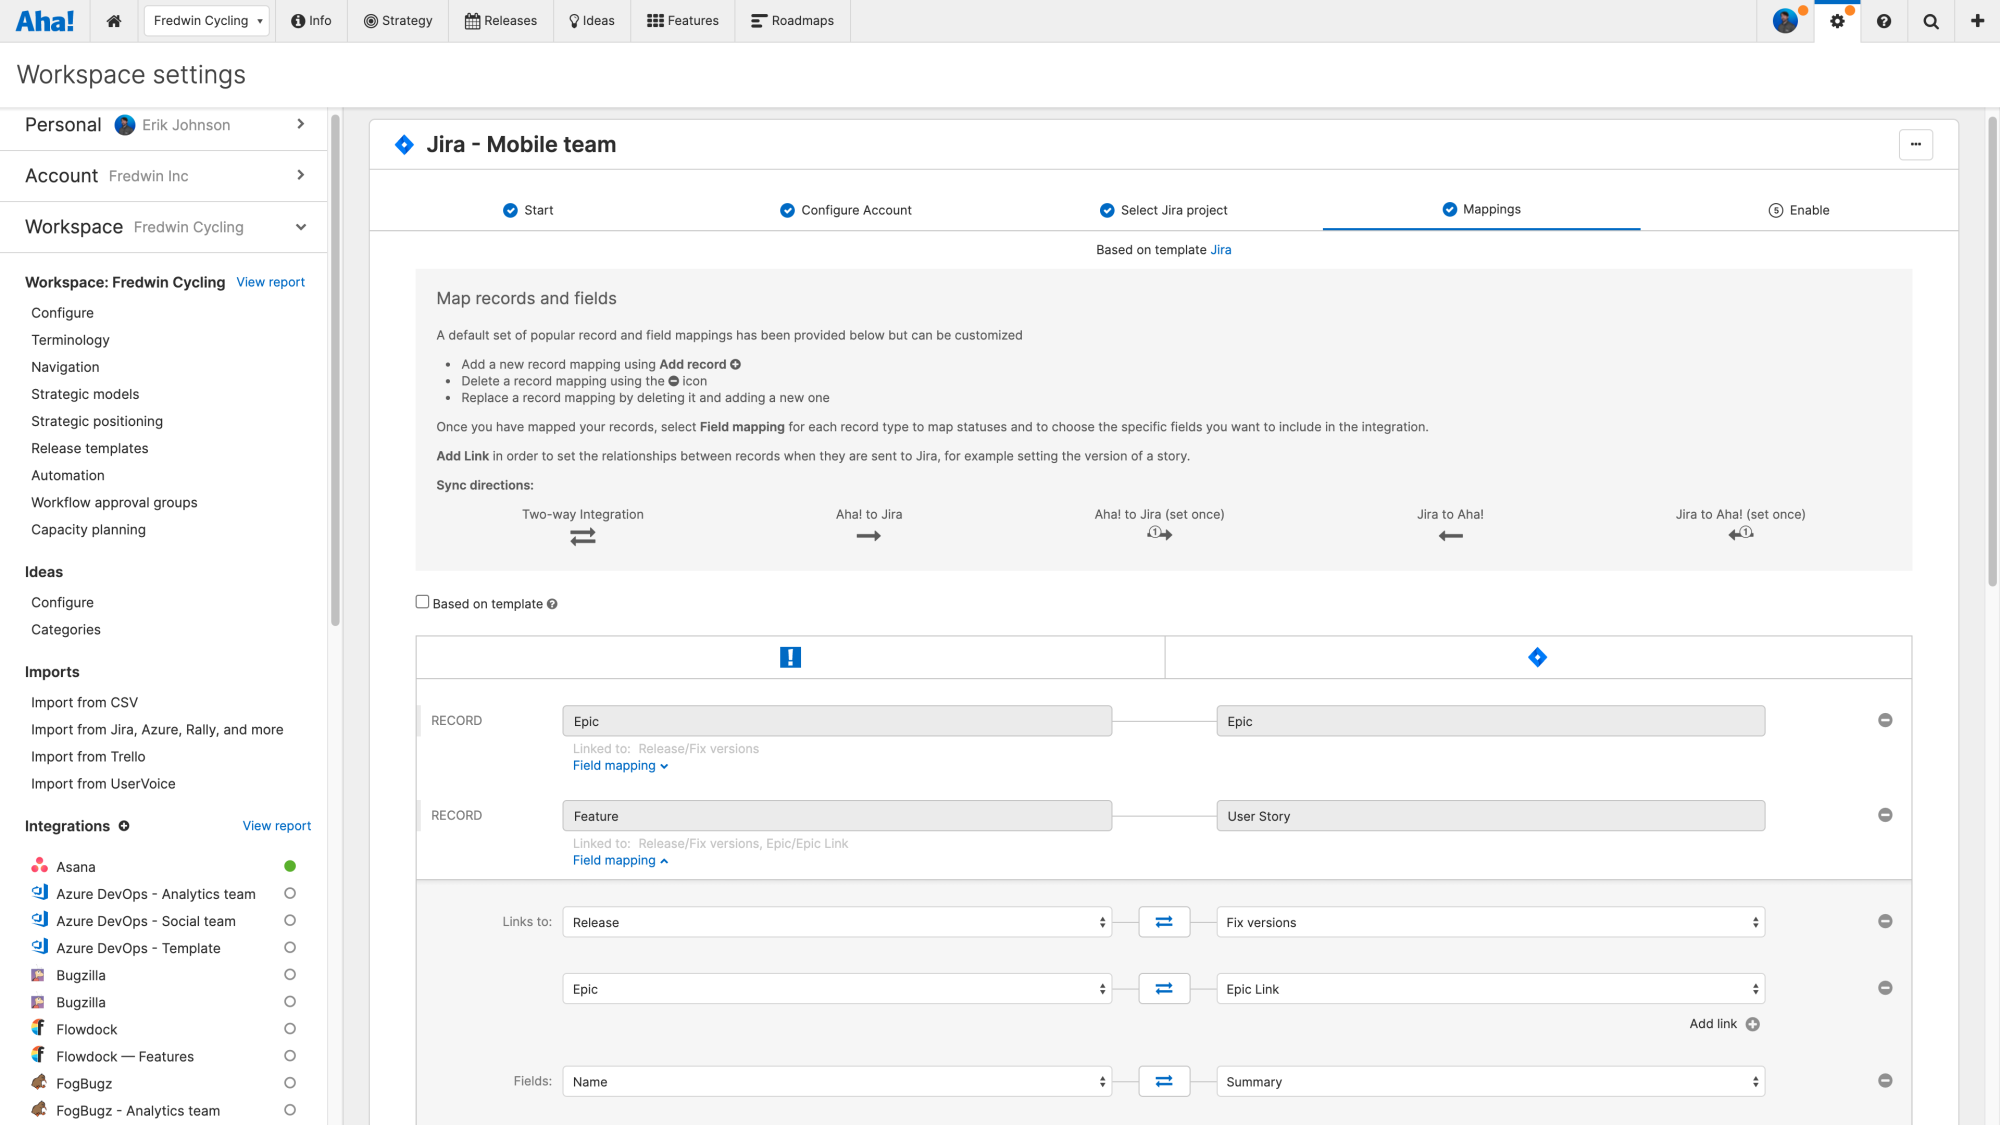 The field mapping step of a Jira integration configuration, including the field mapping 